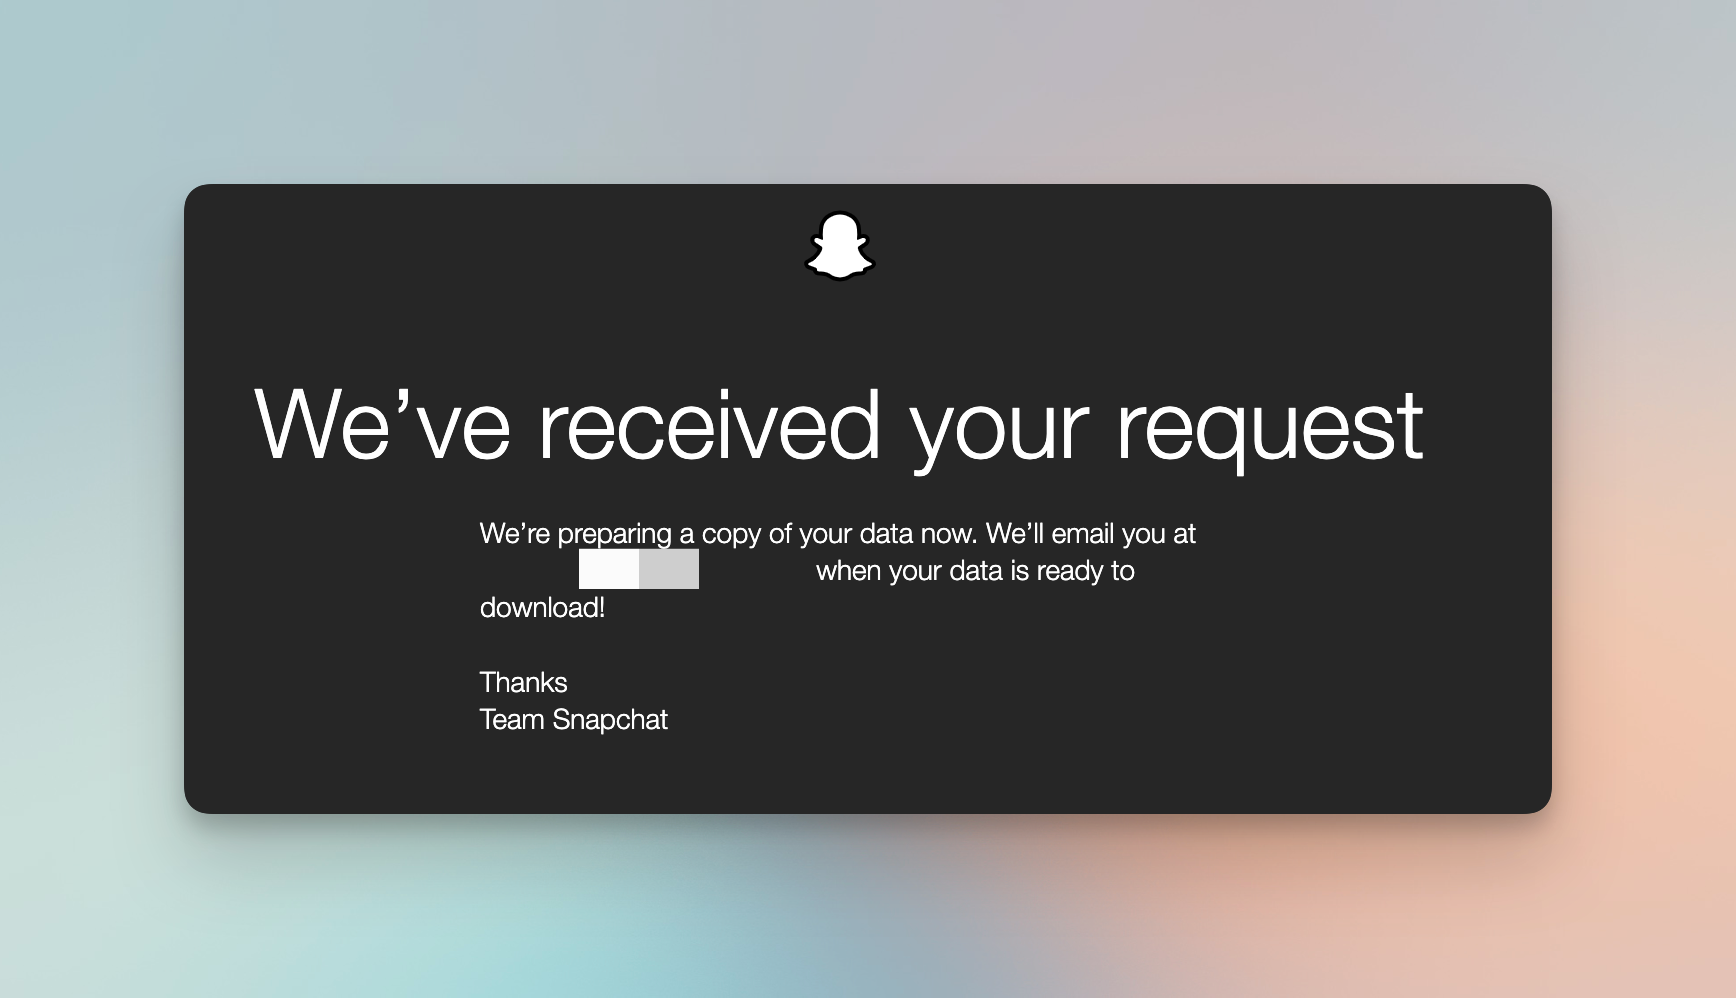 Remote.tools shows the successful message to recover Lost snapchat messages. A download link to lost data will be sent via email. You can recover Snapchat messages from the zip file shared.